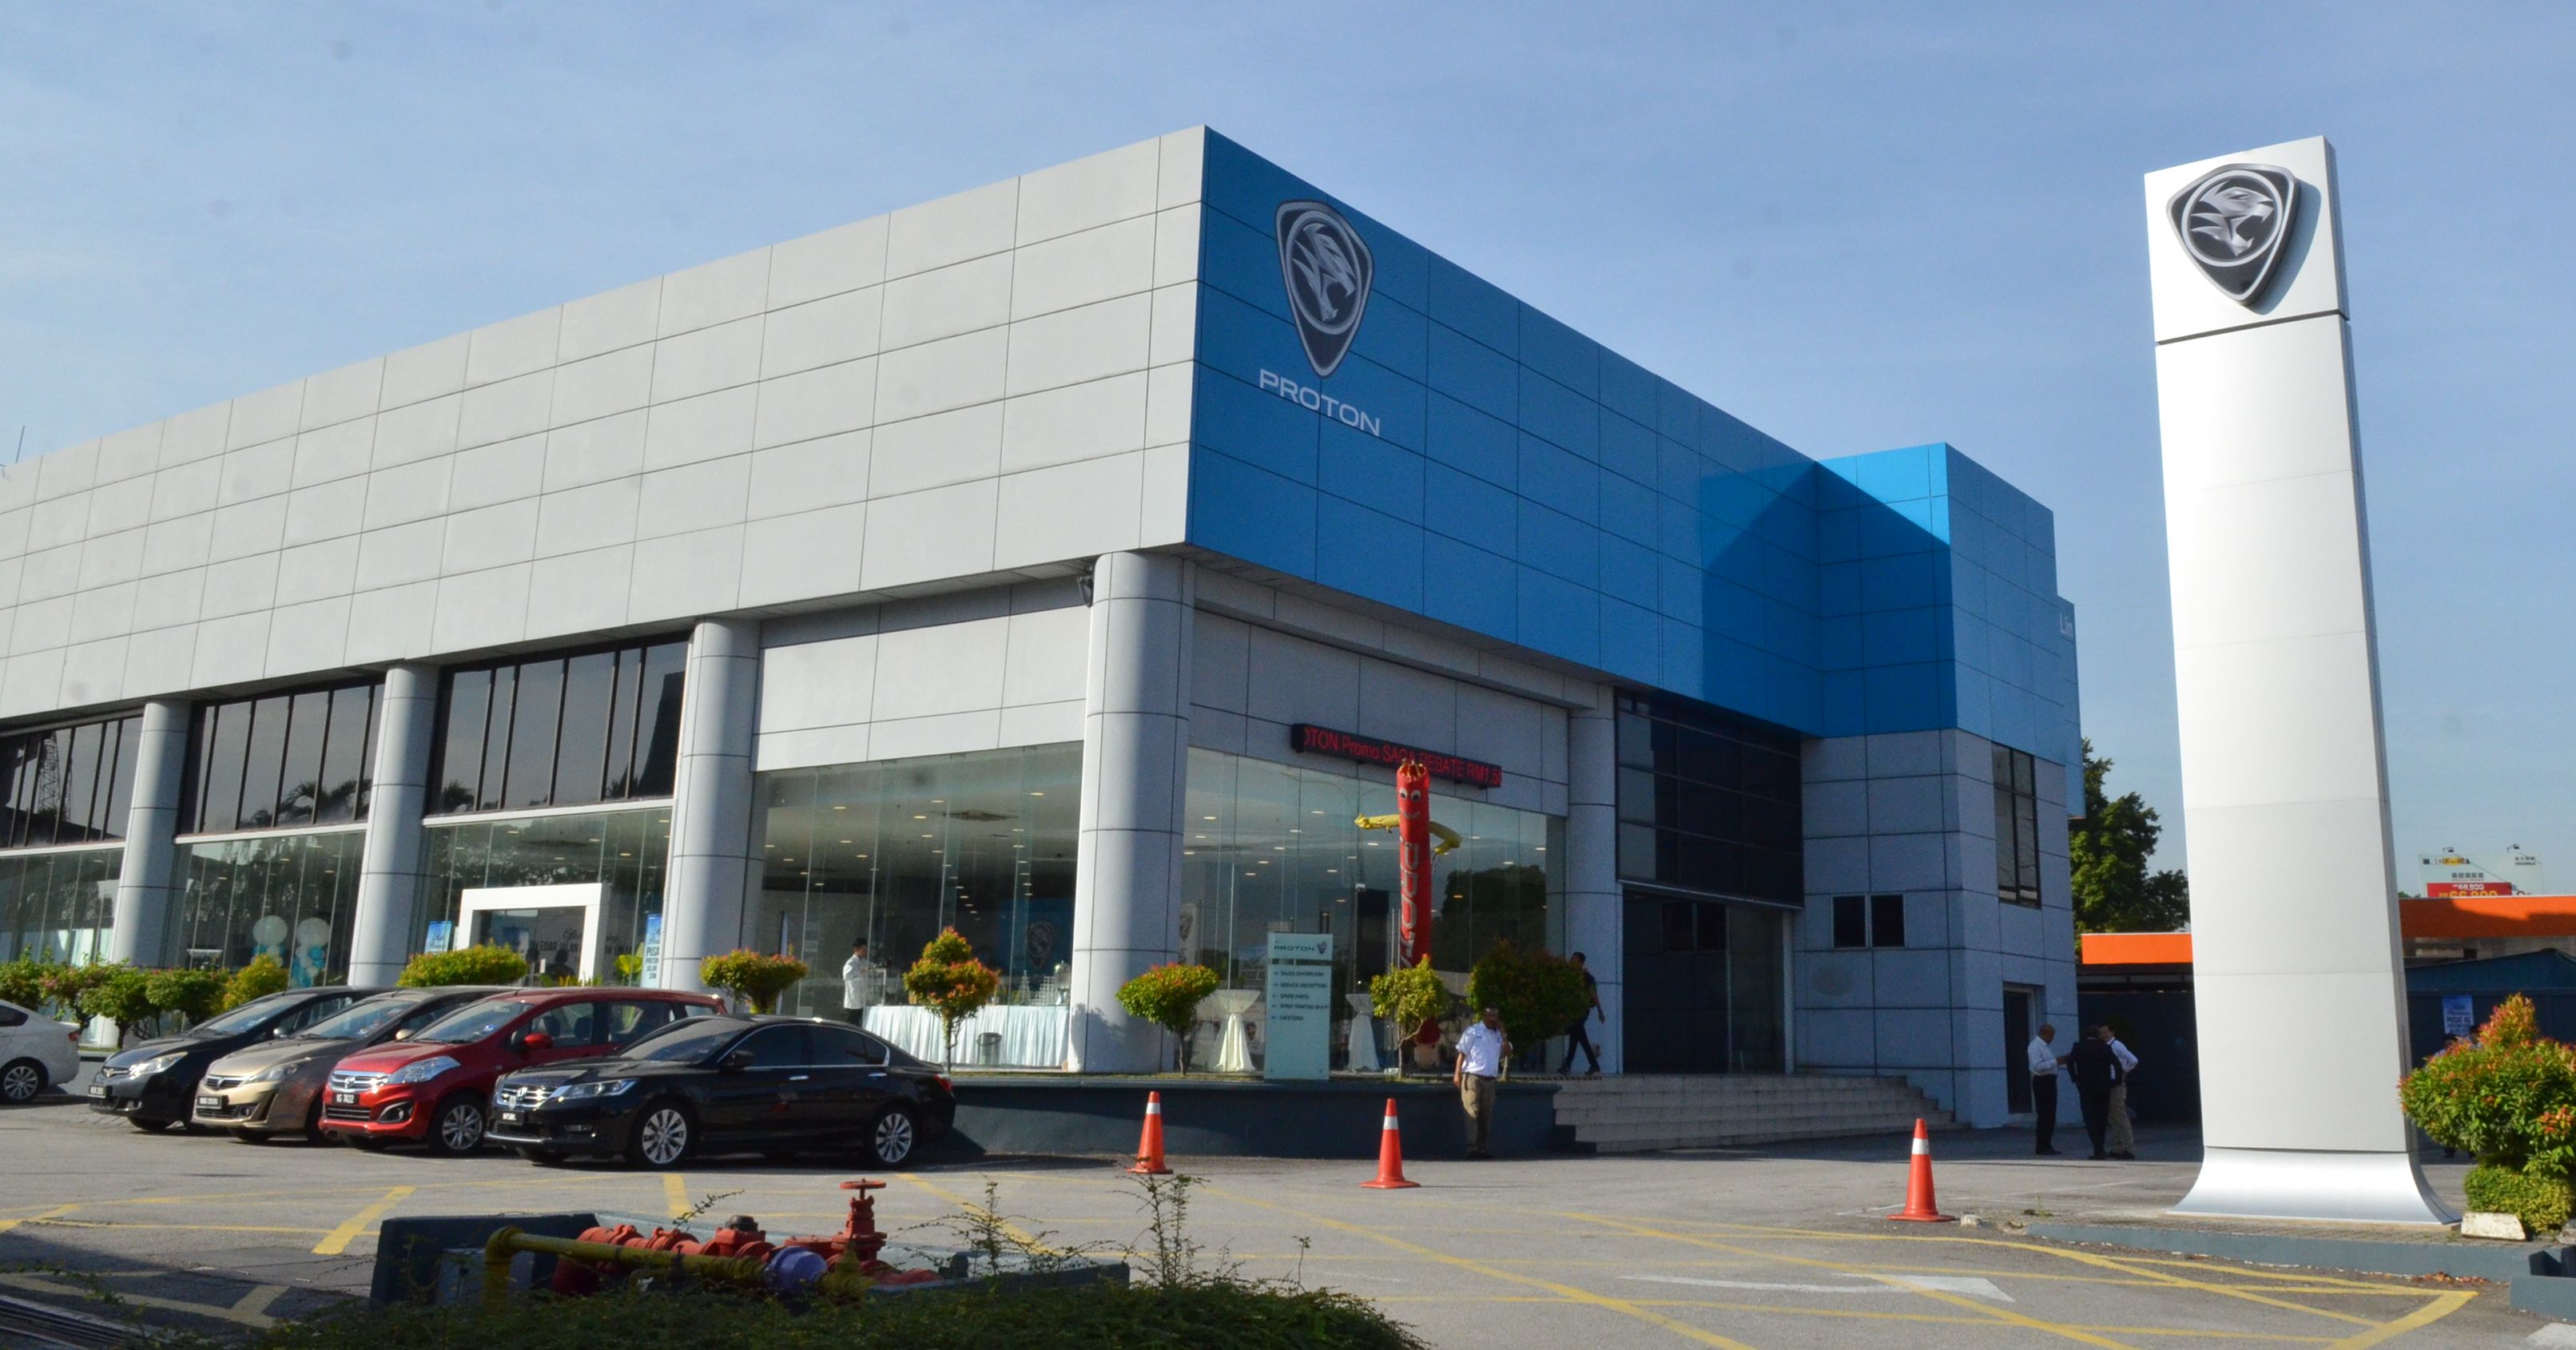 Proton Edar opens upgraded Chan Sow Lin 4S centre